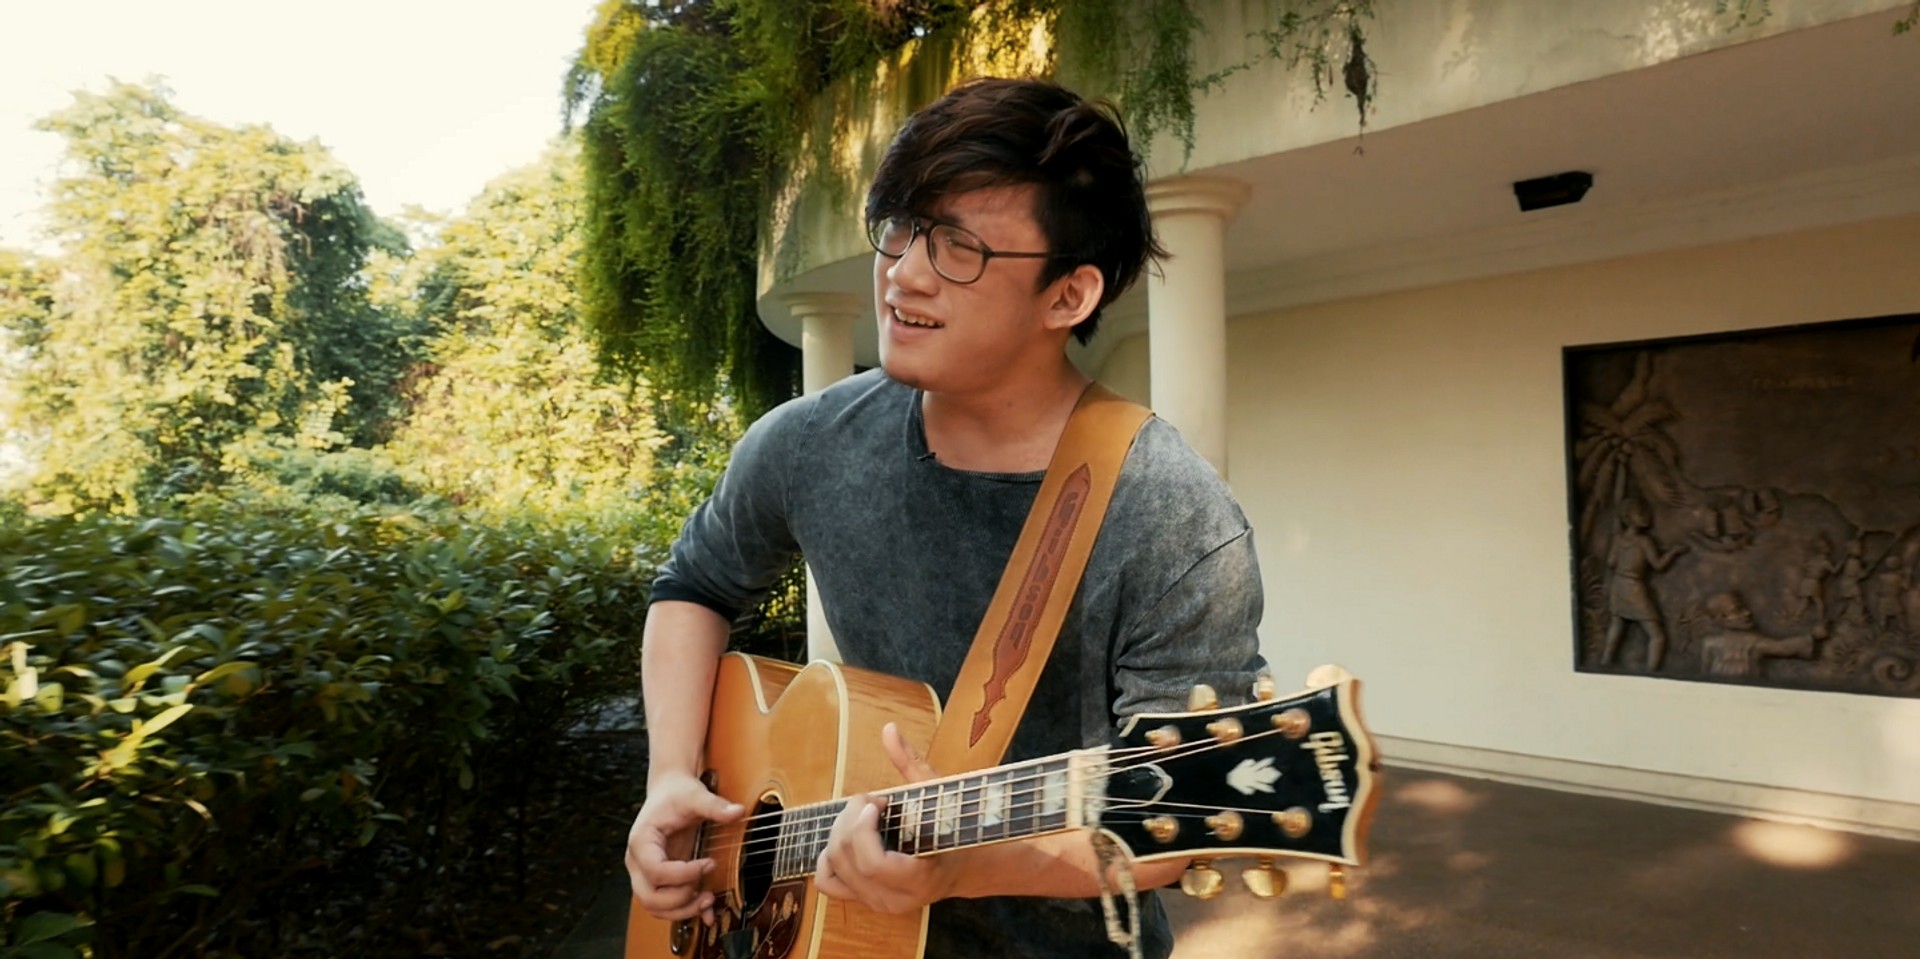 WATCH: JAWN traverses Mount Faber to perform 'Gold' in Bandwagon Sessions